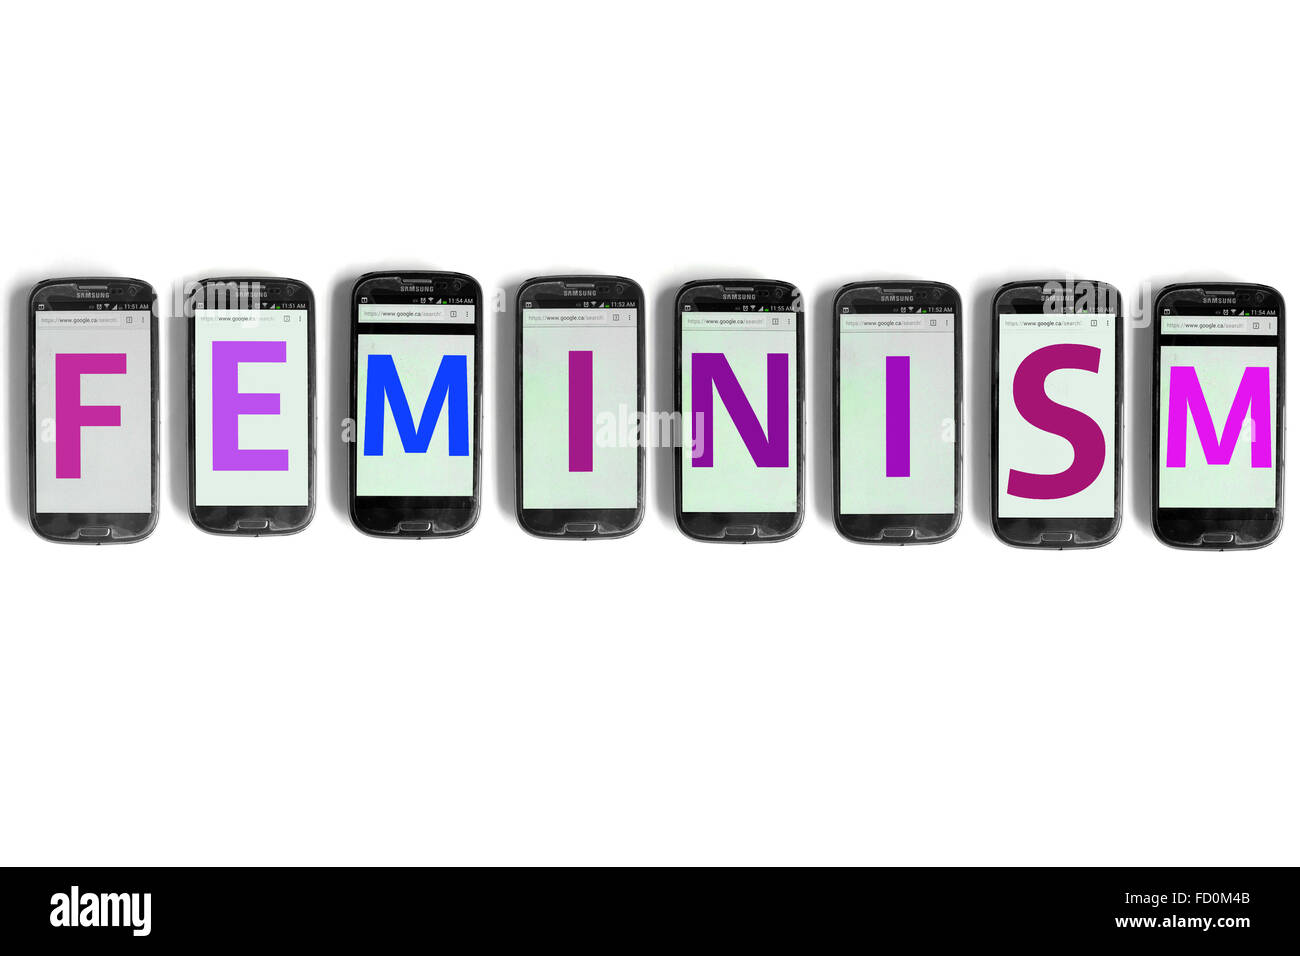 Feminism on the screens of smartphones photographed against a white background. Stock Photo